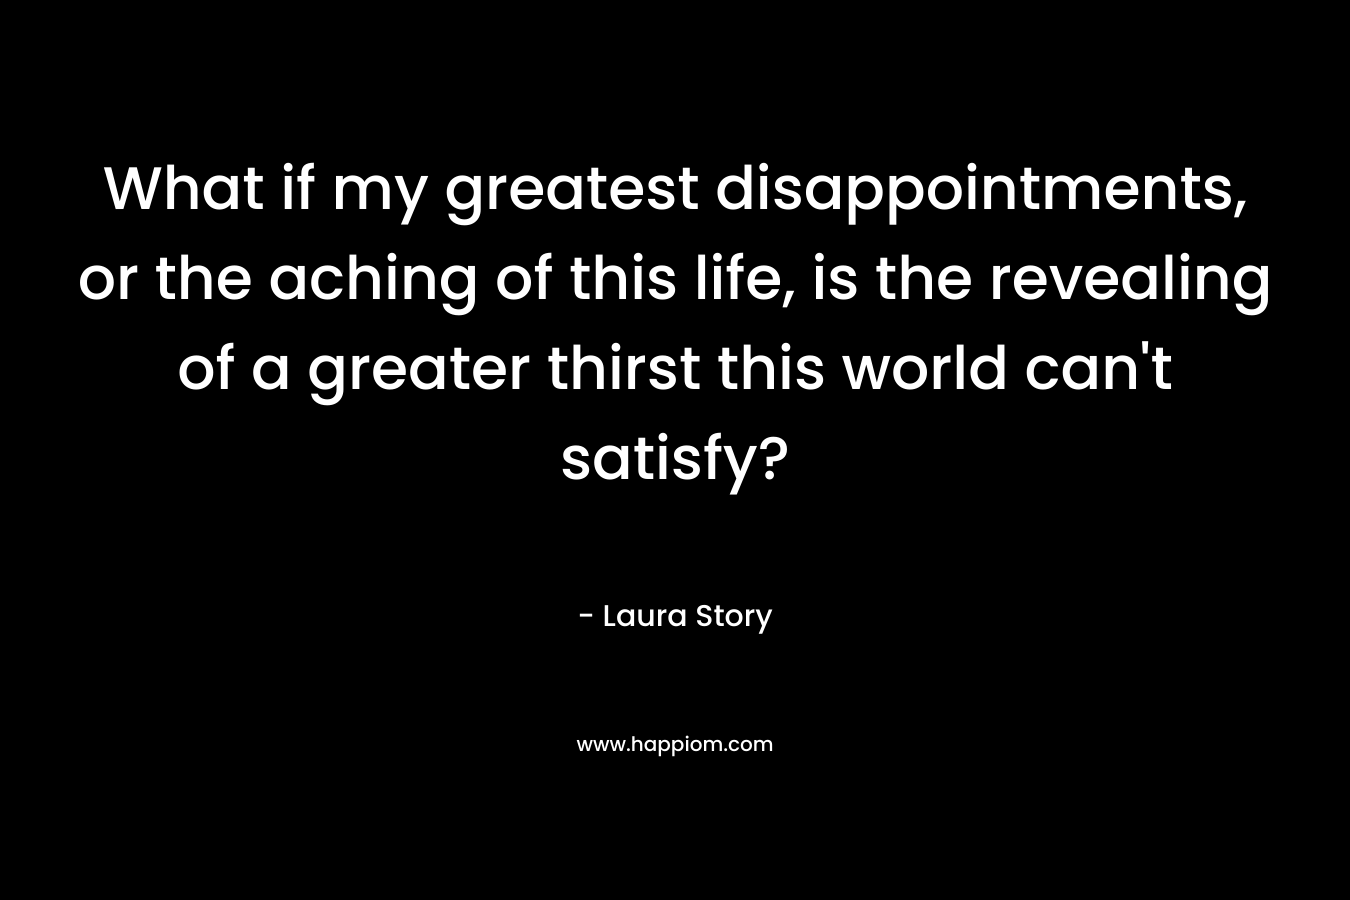 What if my greatest disappointments, or the aching of this life, is the revealing of a greater thirst this world can’t satisfy? – Laura Story